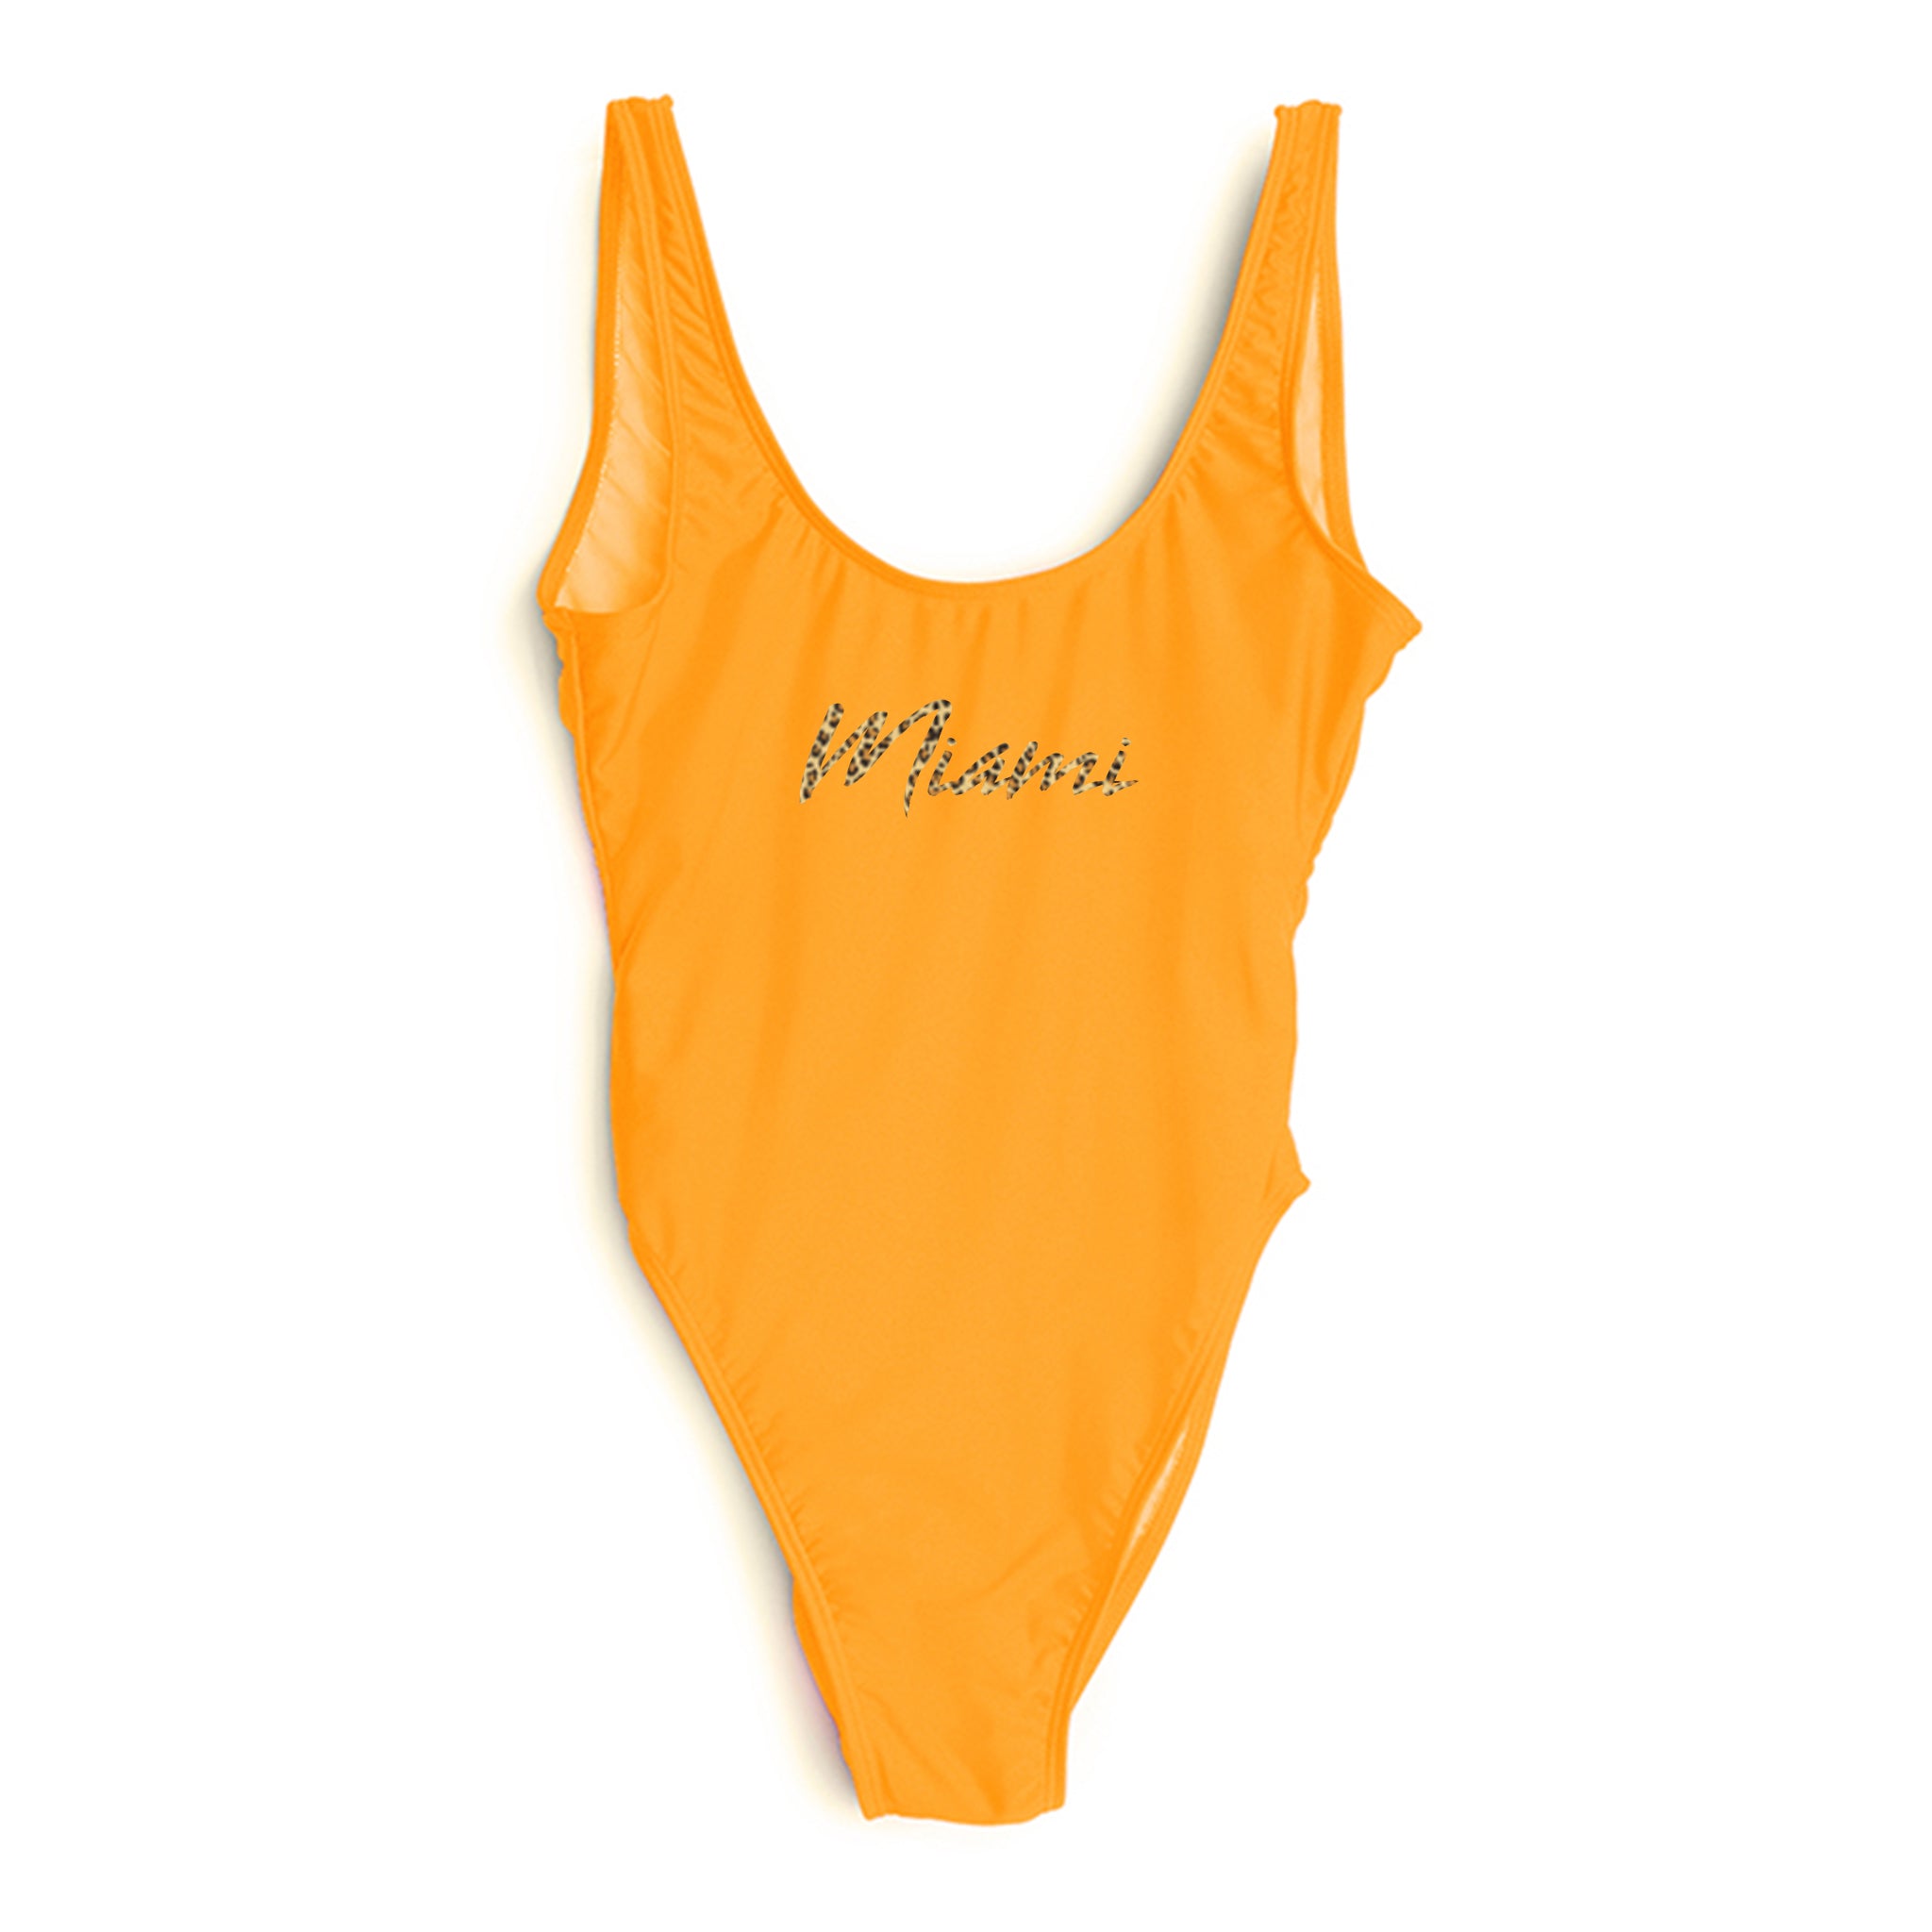 MIAMI W/ CHEETAH TEXT // NEW WILD THING FONT [SWIMSUIT]